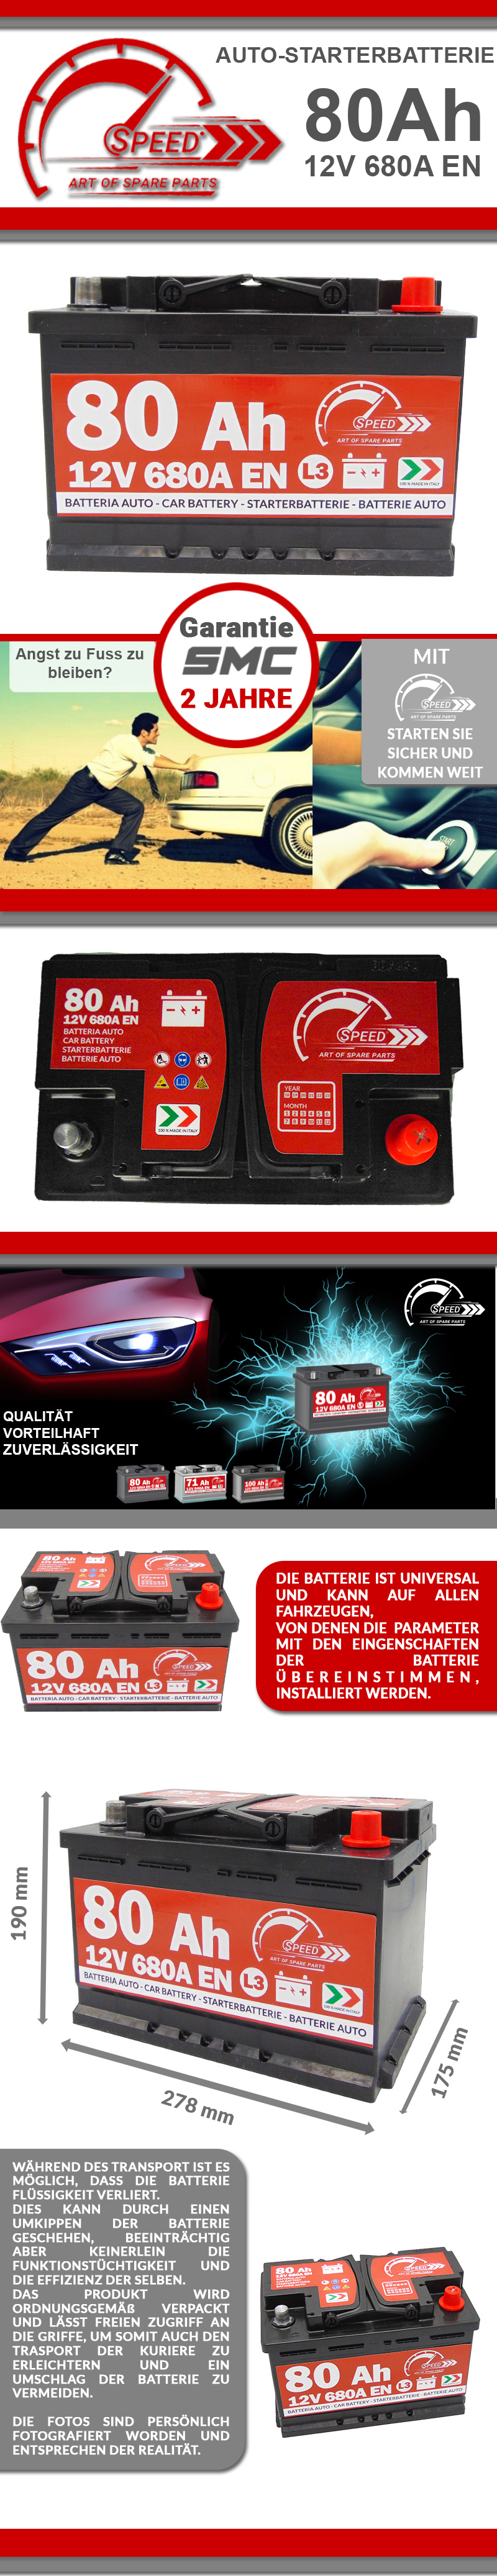 SPEED Autobatterie 80Ah 680A 12V